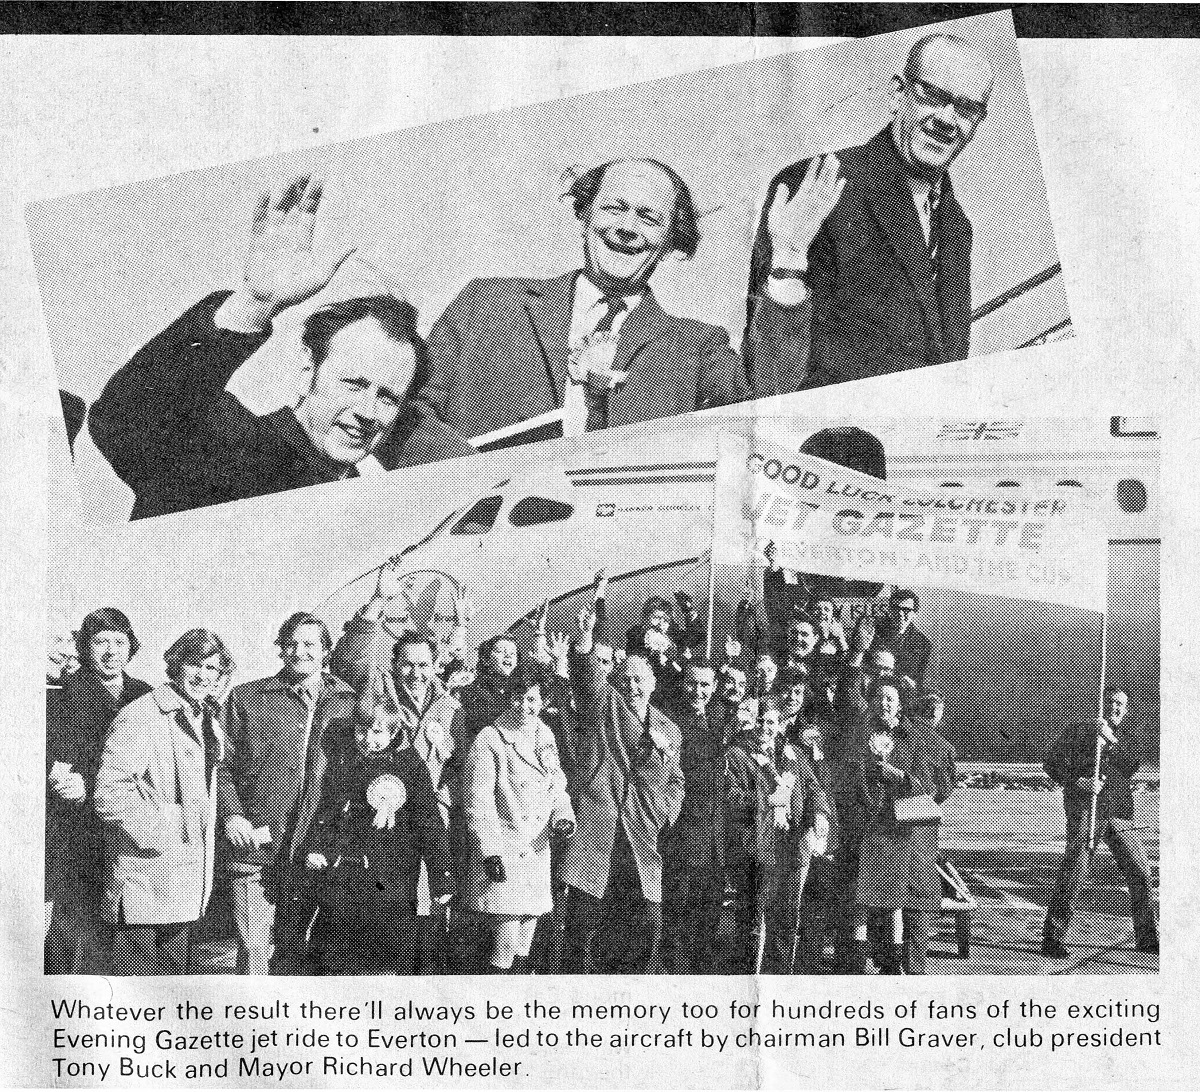 Following their club - this Gazette feature shows Us fans getting set to board their flight at Stansted